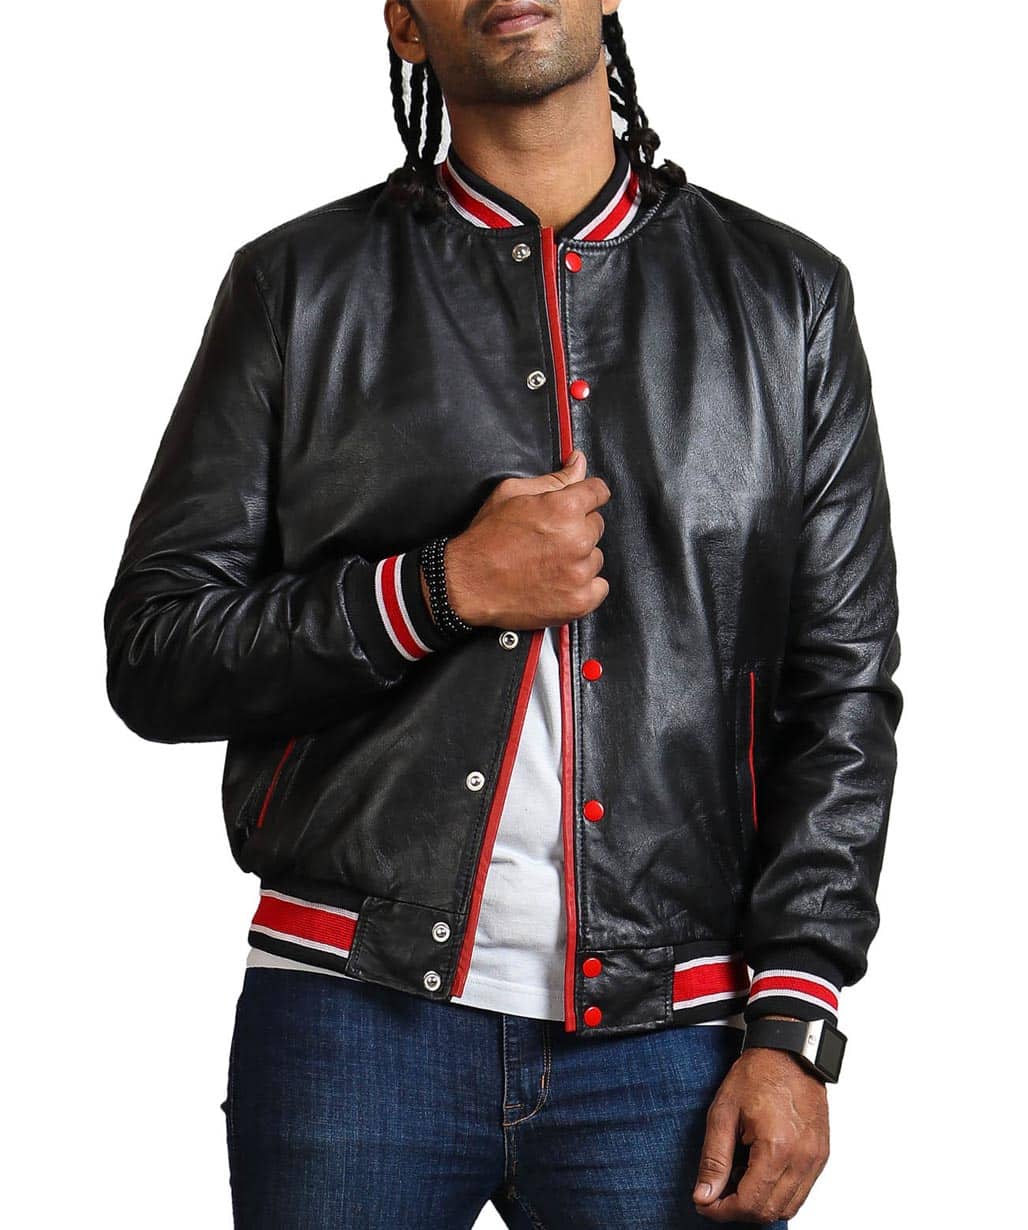 mens-black-and-red-bomber-leather-jacket-outfit